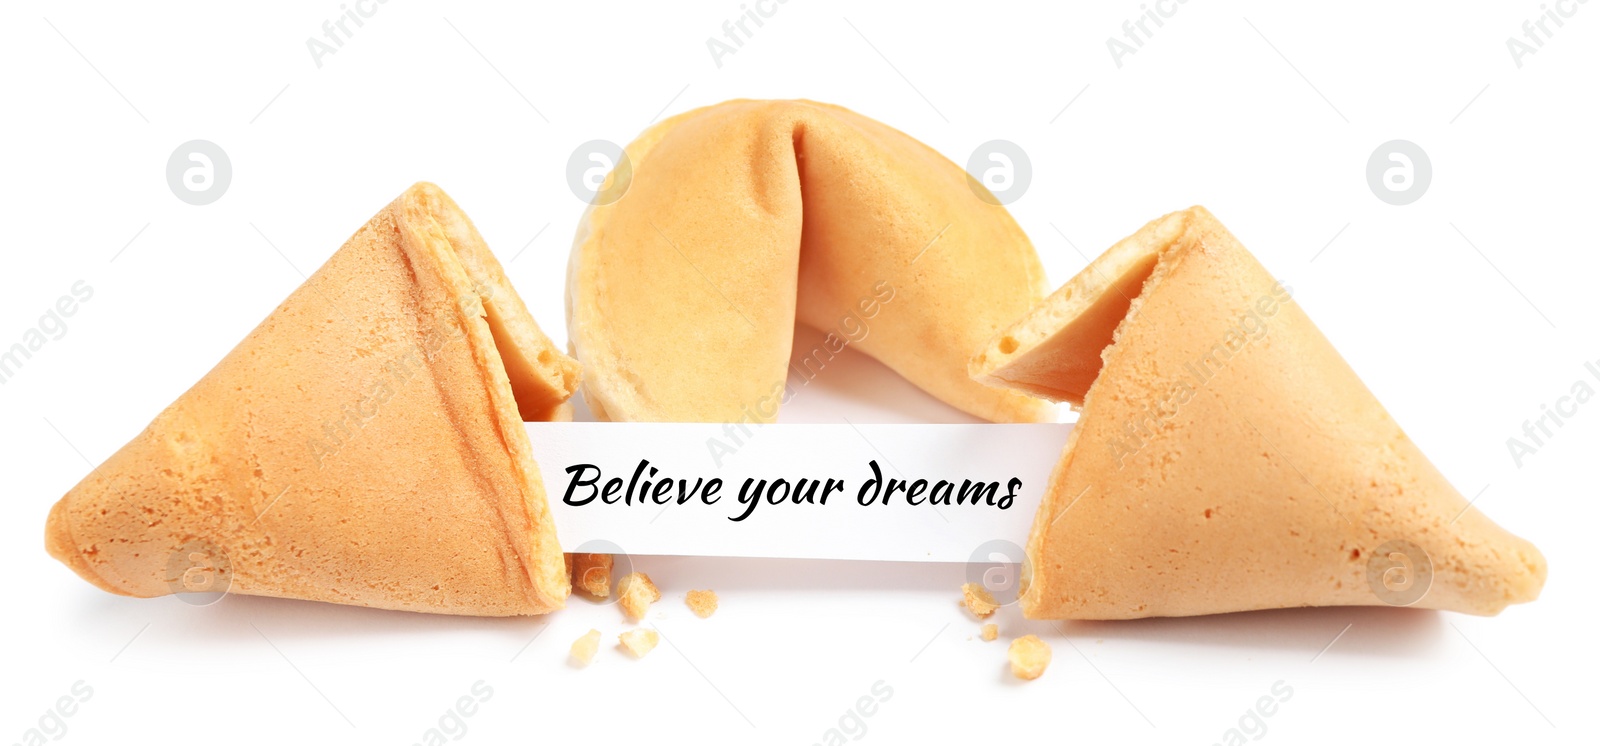 Image of Tasty fortune cookies with prediction Believe your dreams on white background